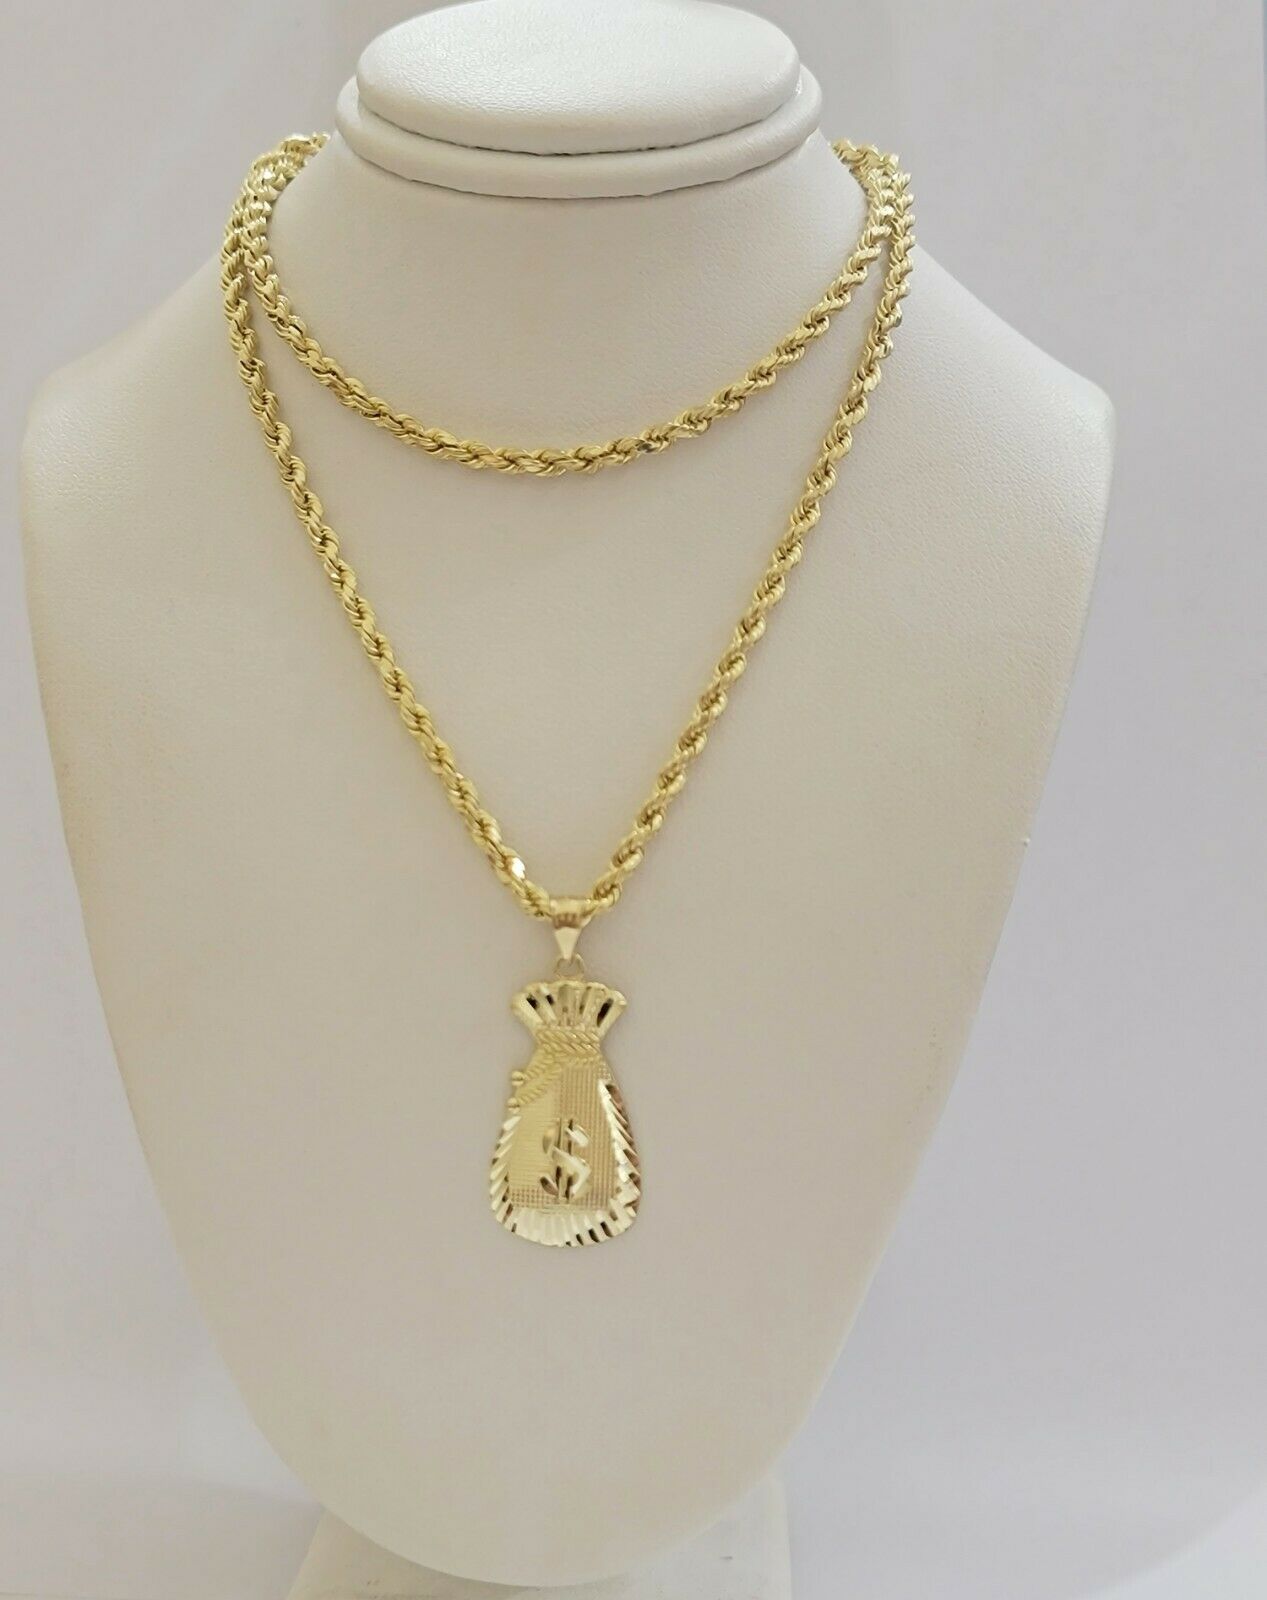 REAL 10k Gold Rope Chain Charm Pendant  SET 3mm Necklace 18-28